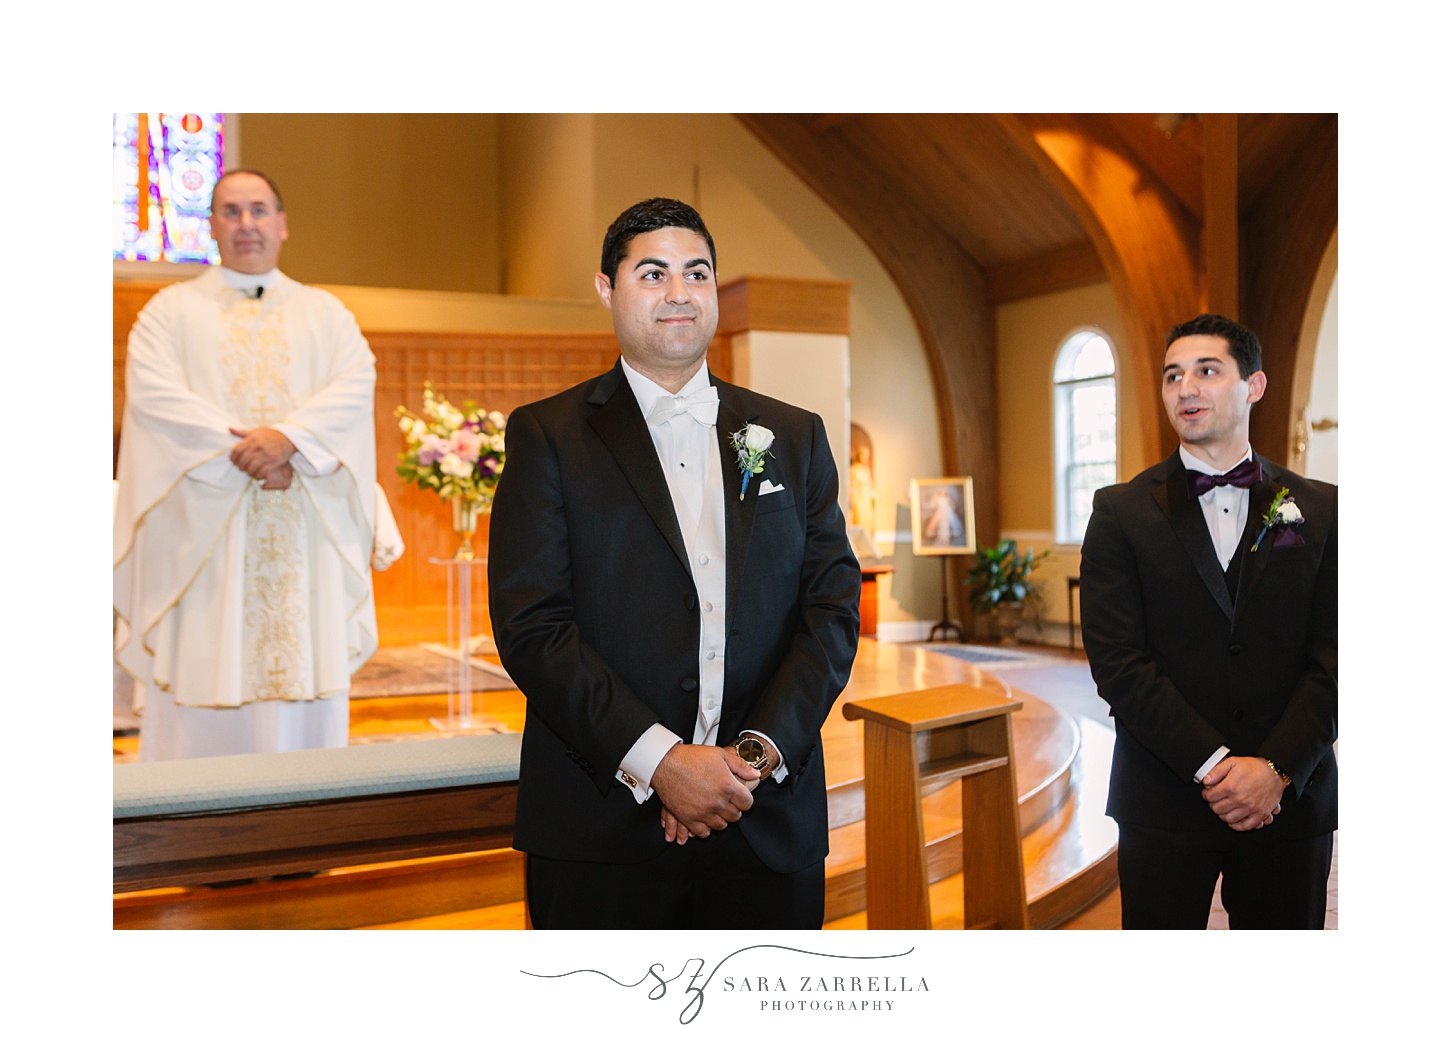 groom tears up looking at bride during traditional wedding ceremony in Rhode Island church